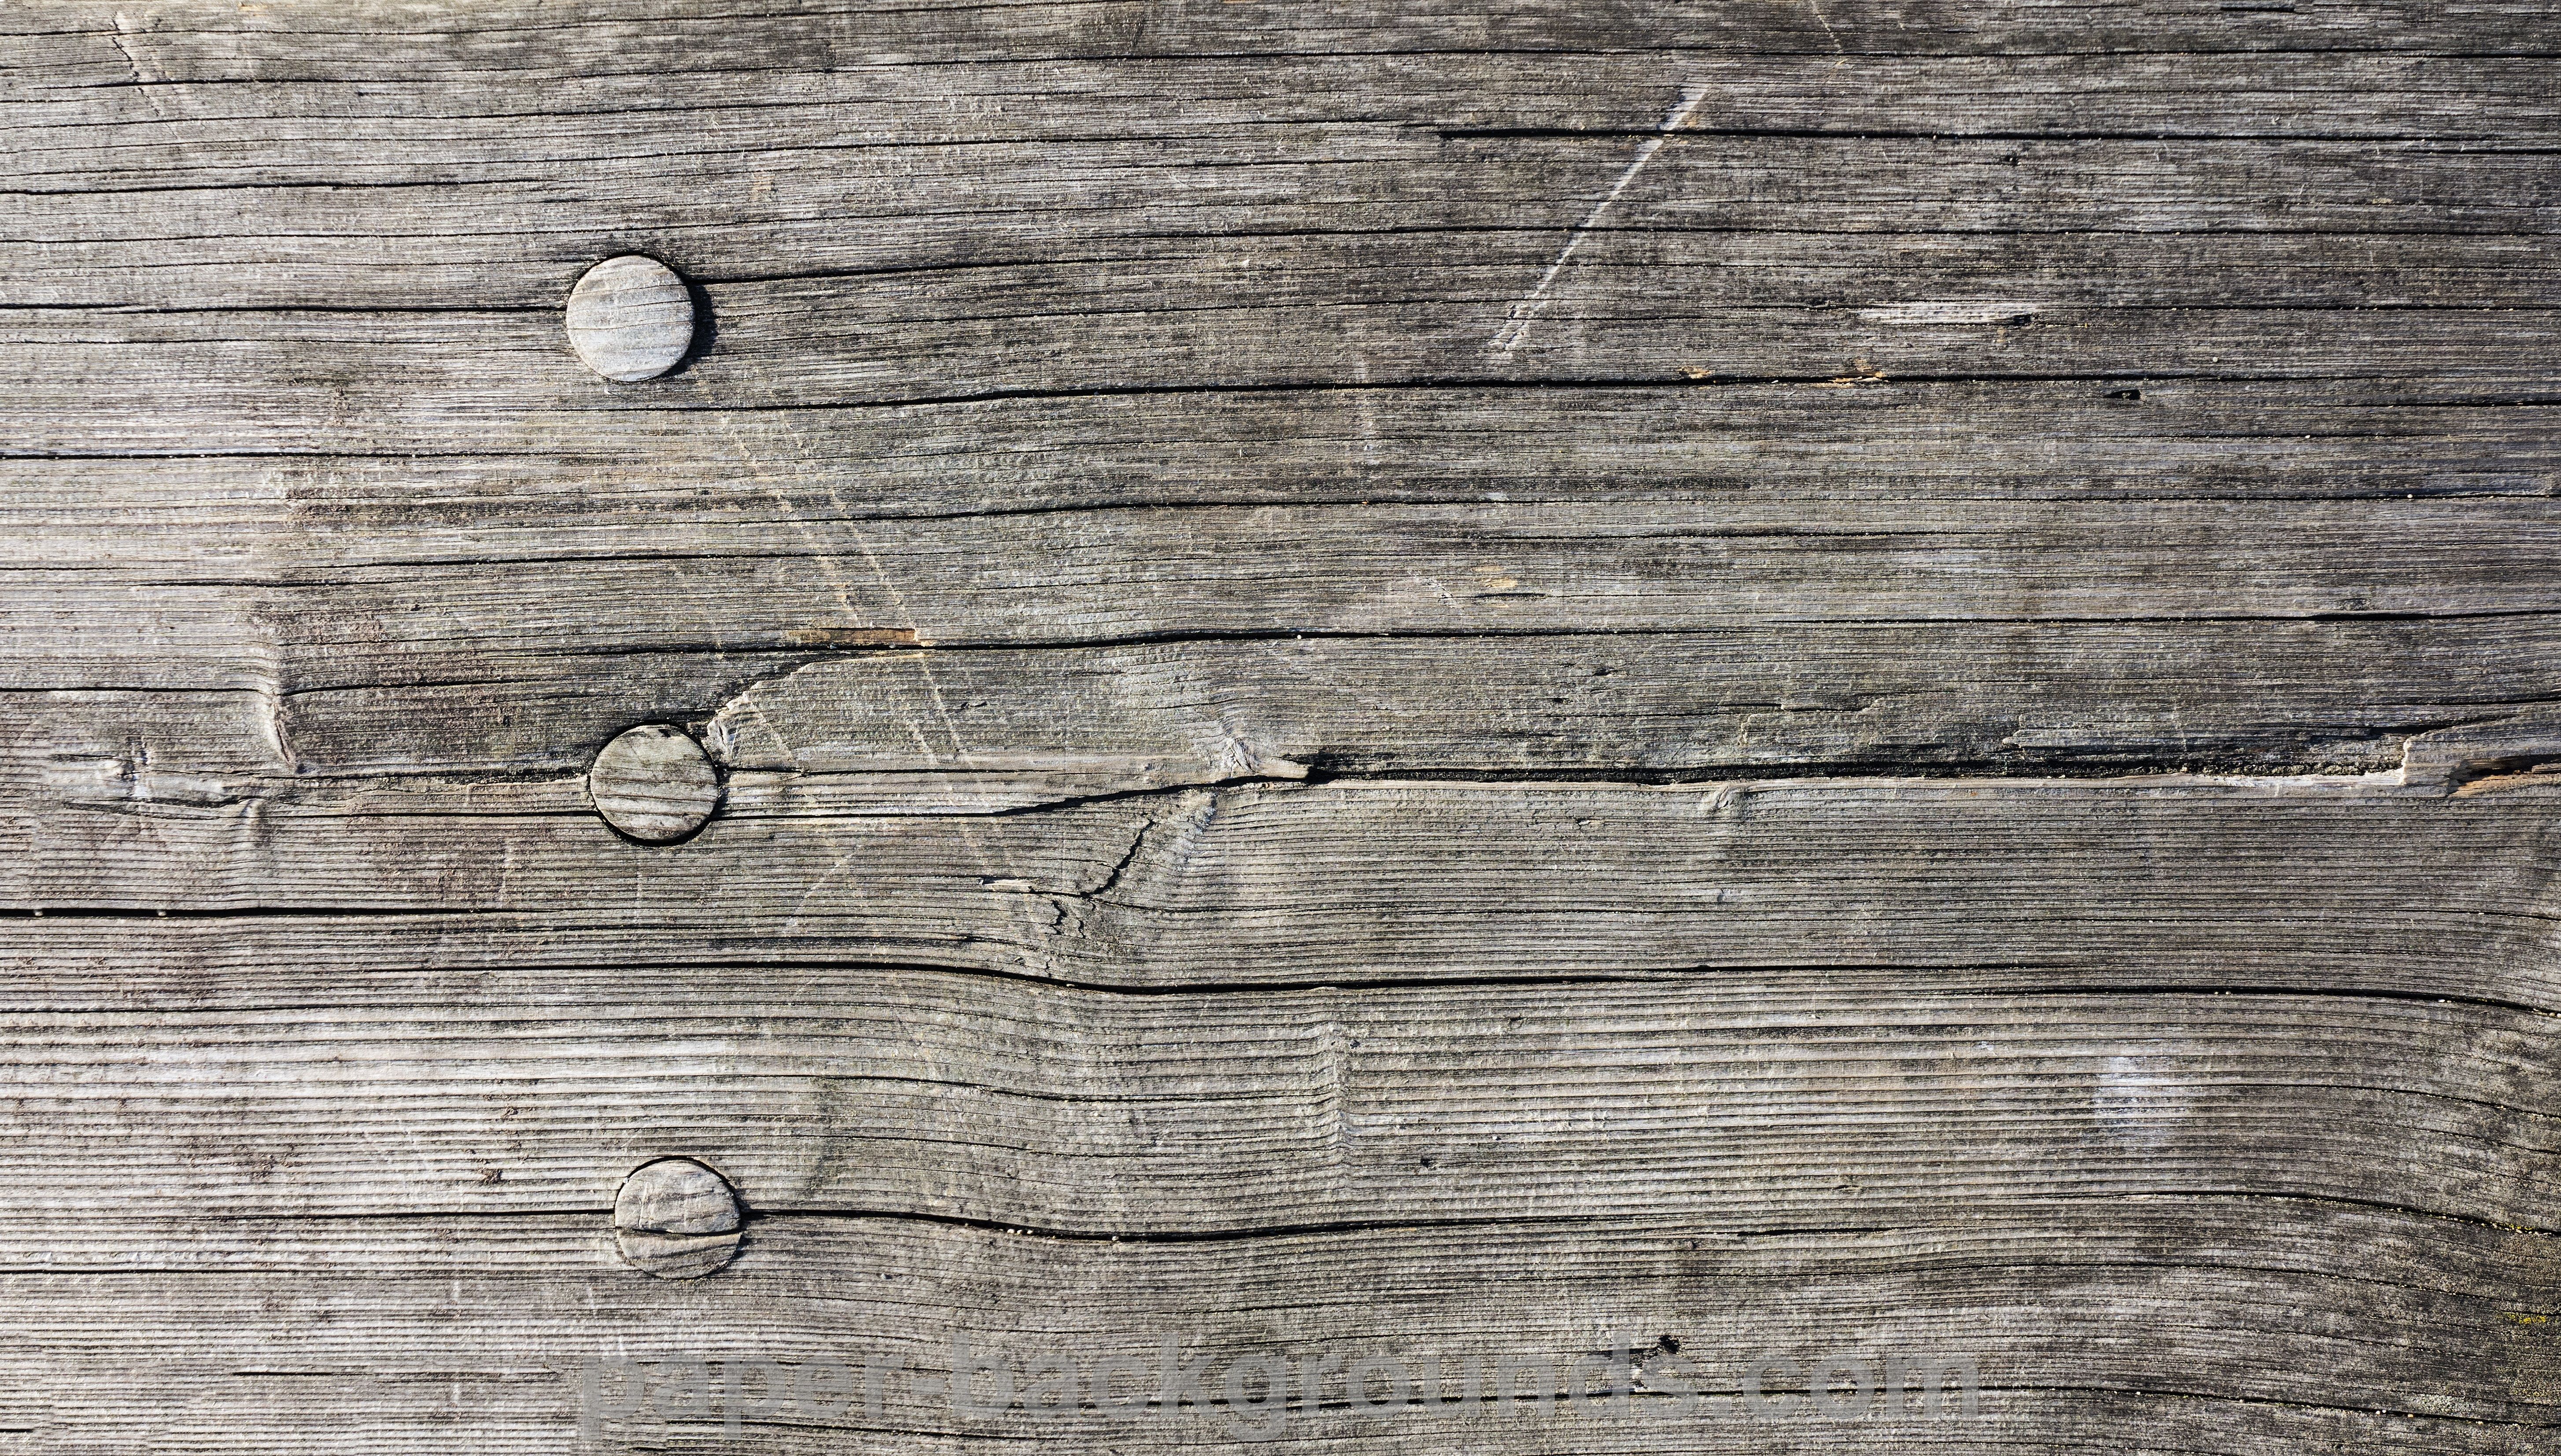 Old Wood Board Texture | Textures, Patterns, Backgrounds | Pinterest ...